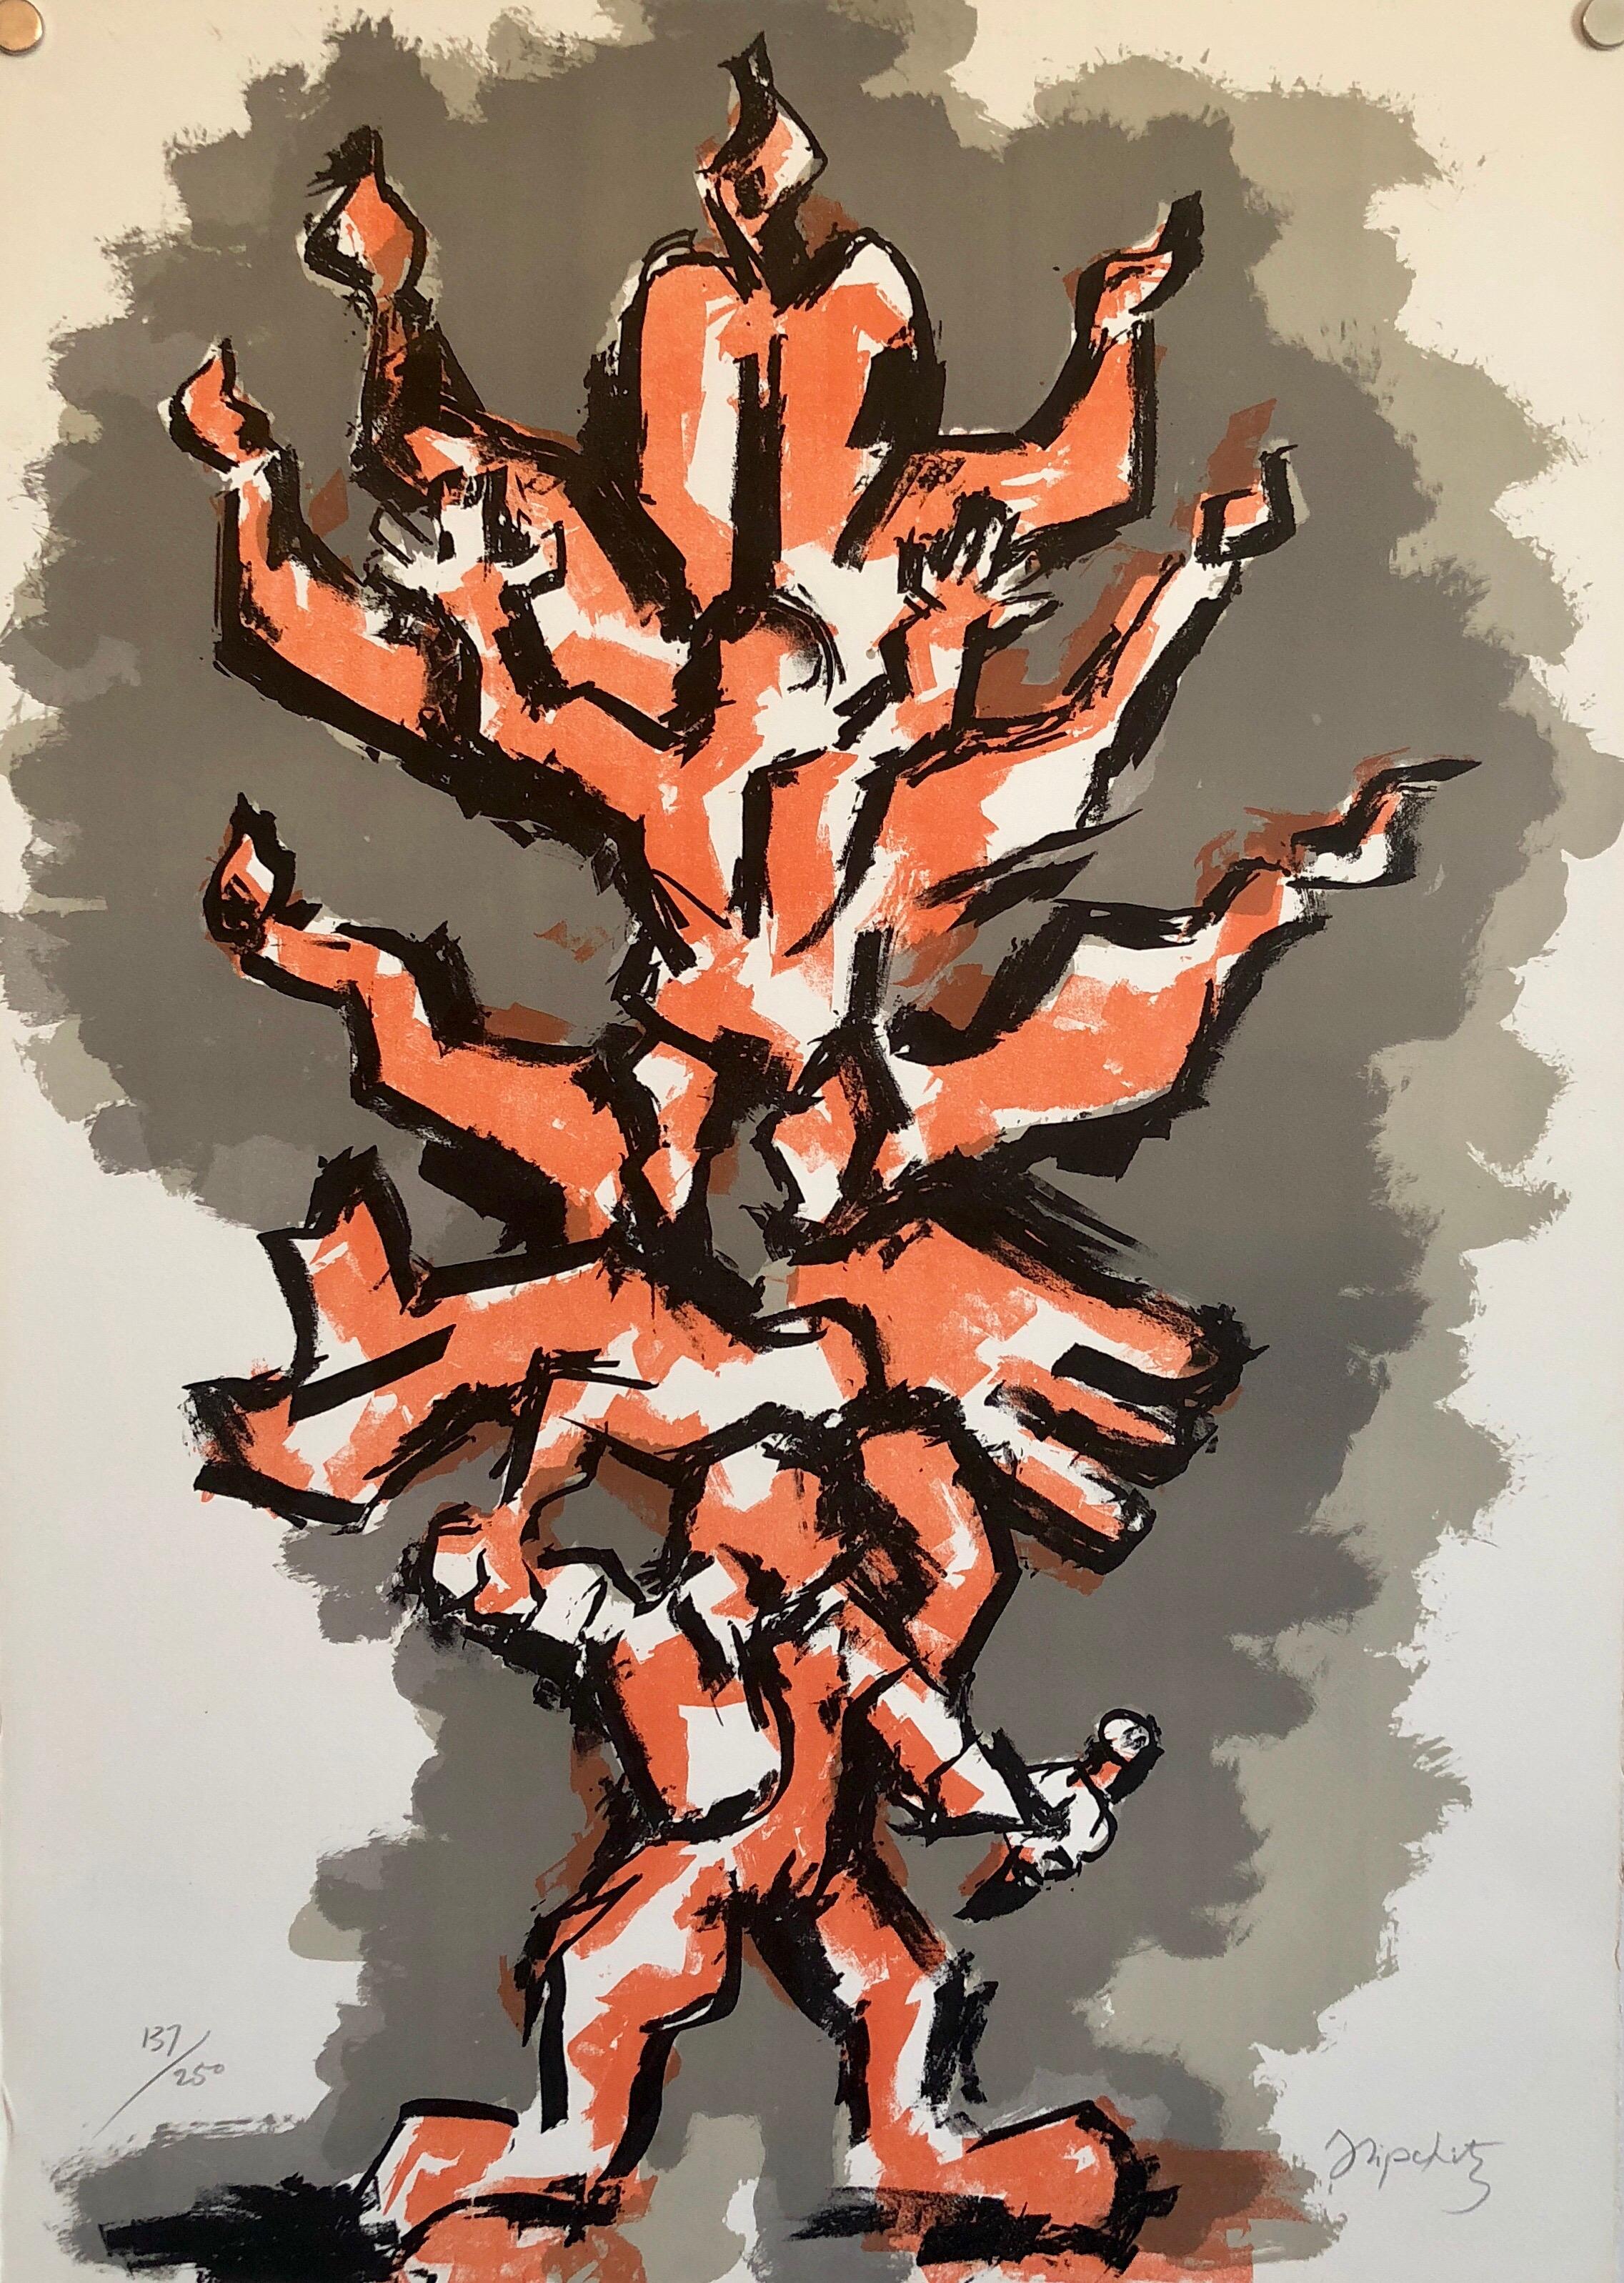 Jacques Lipchitz Figurative Print - Large Color French Cubist Lithograph Tree of Life Signed Ltd Ed. Sculpture Study